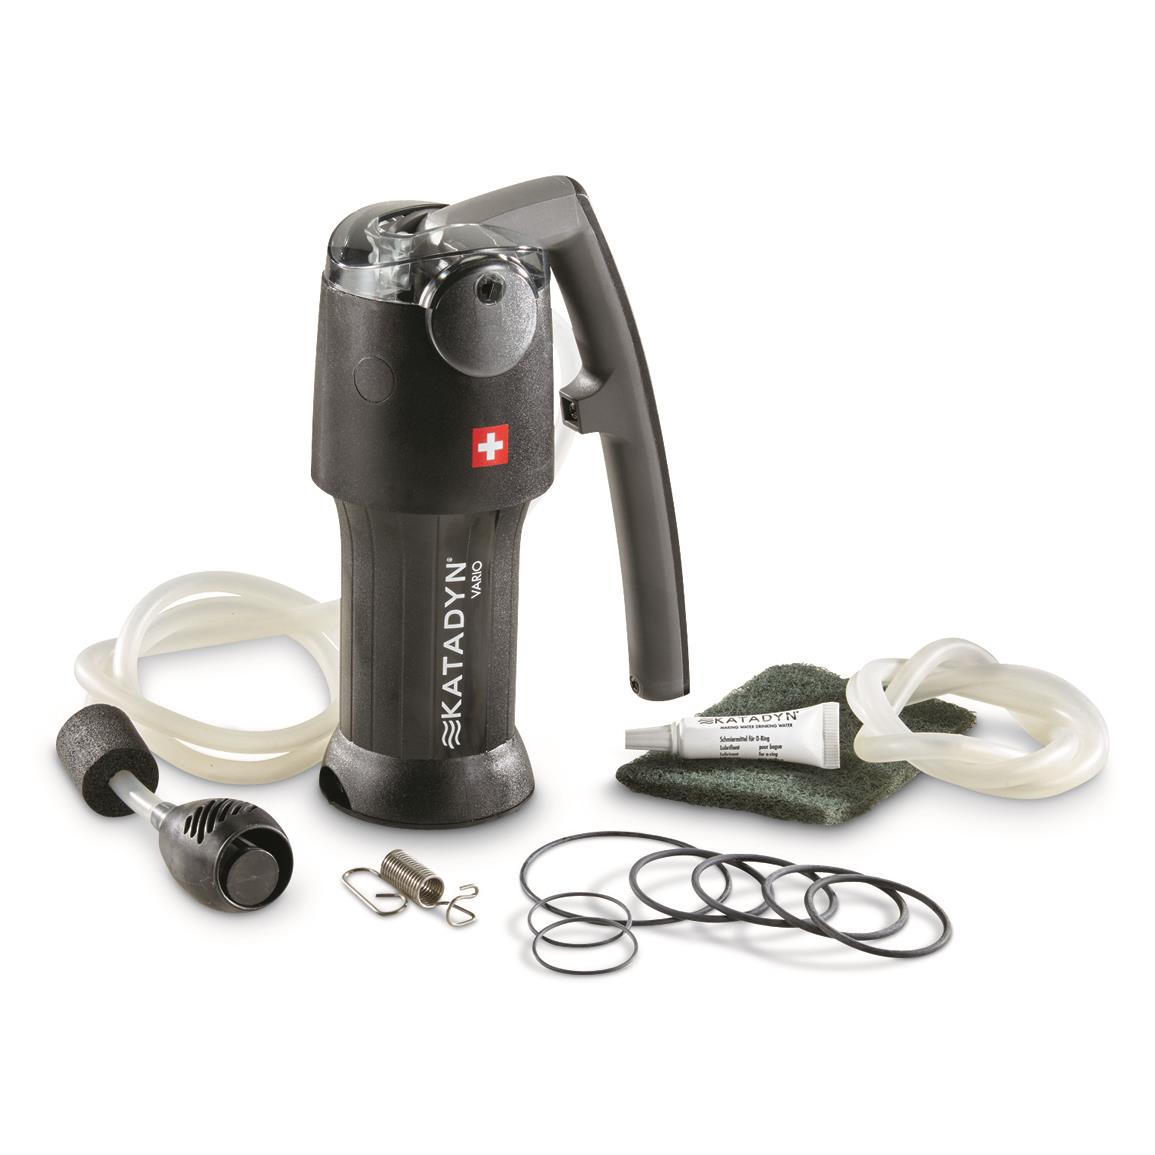 Includes intake hose, output hose, cleaning pad and silicone lubricant